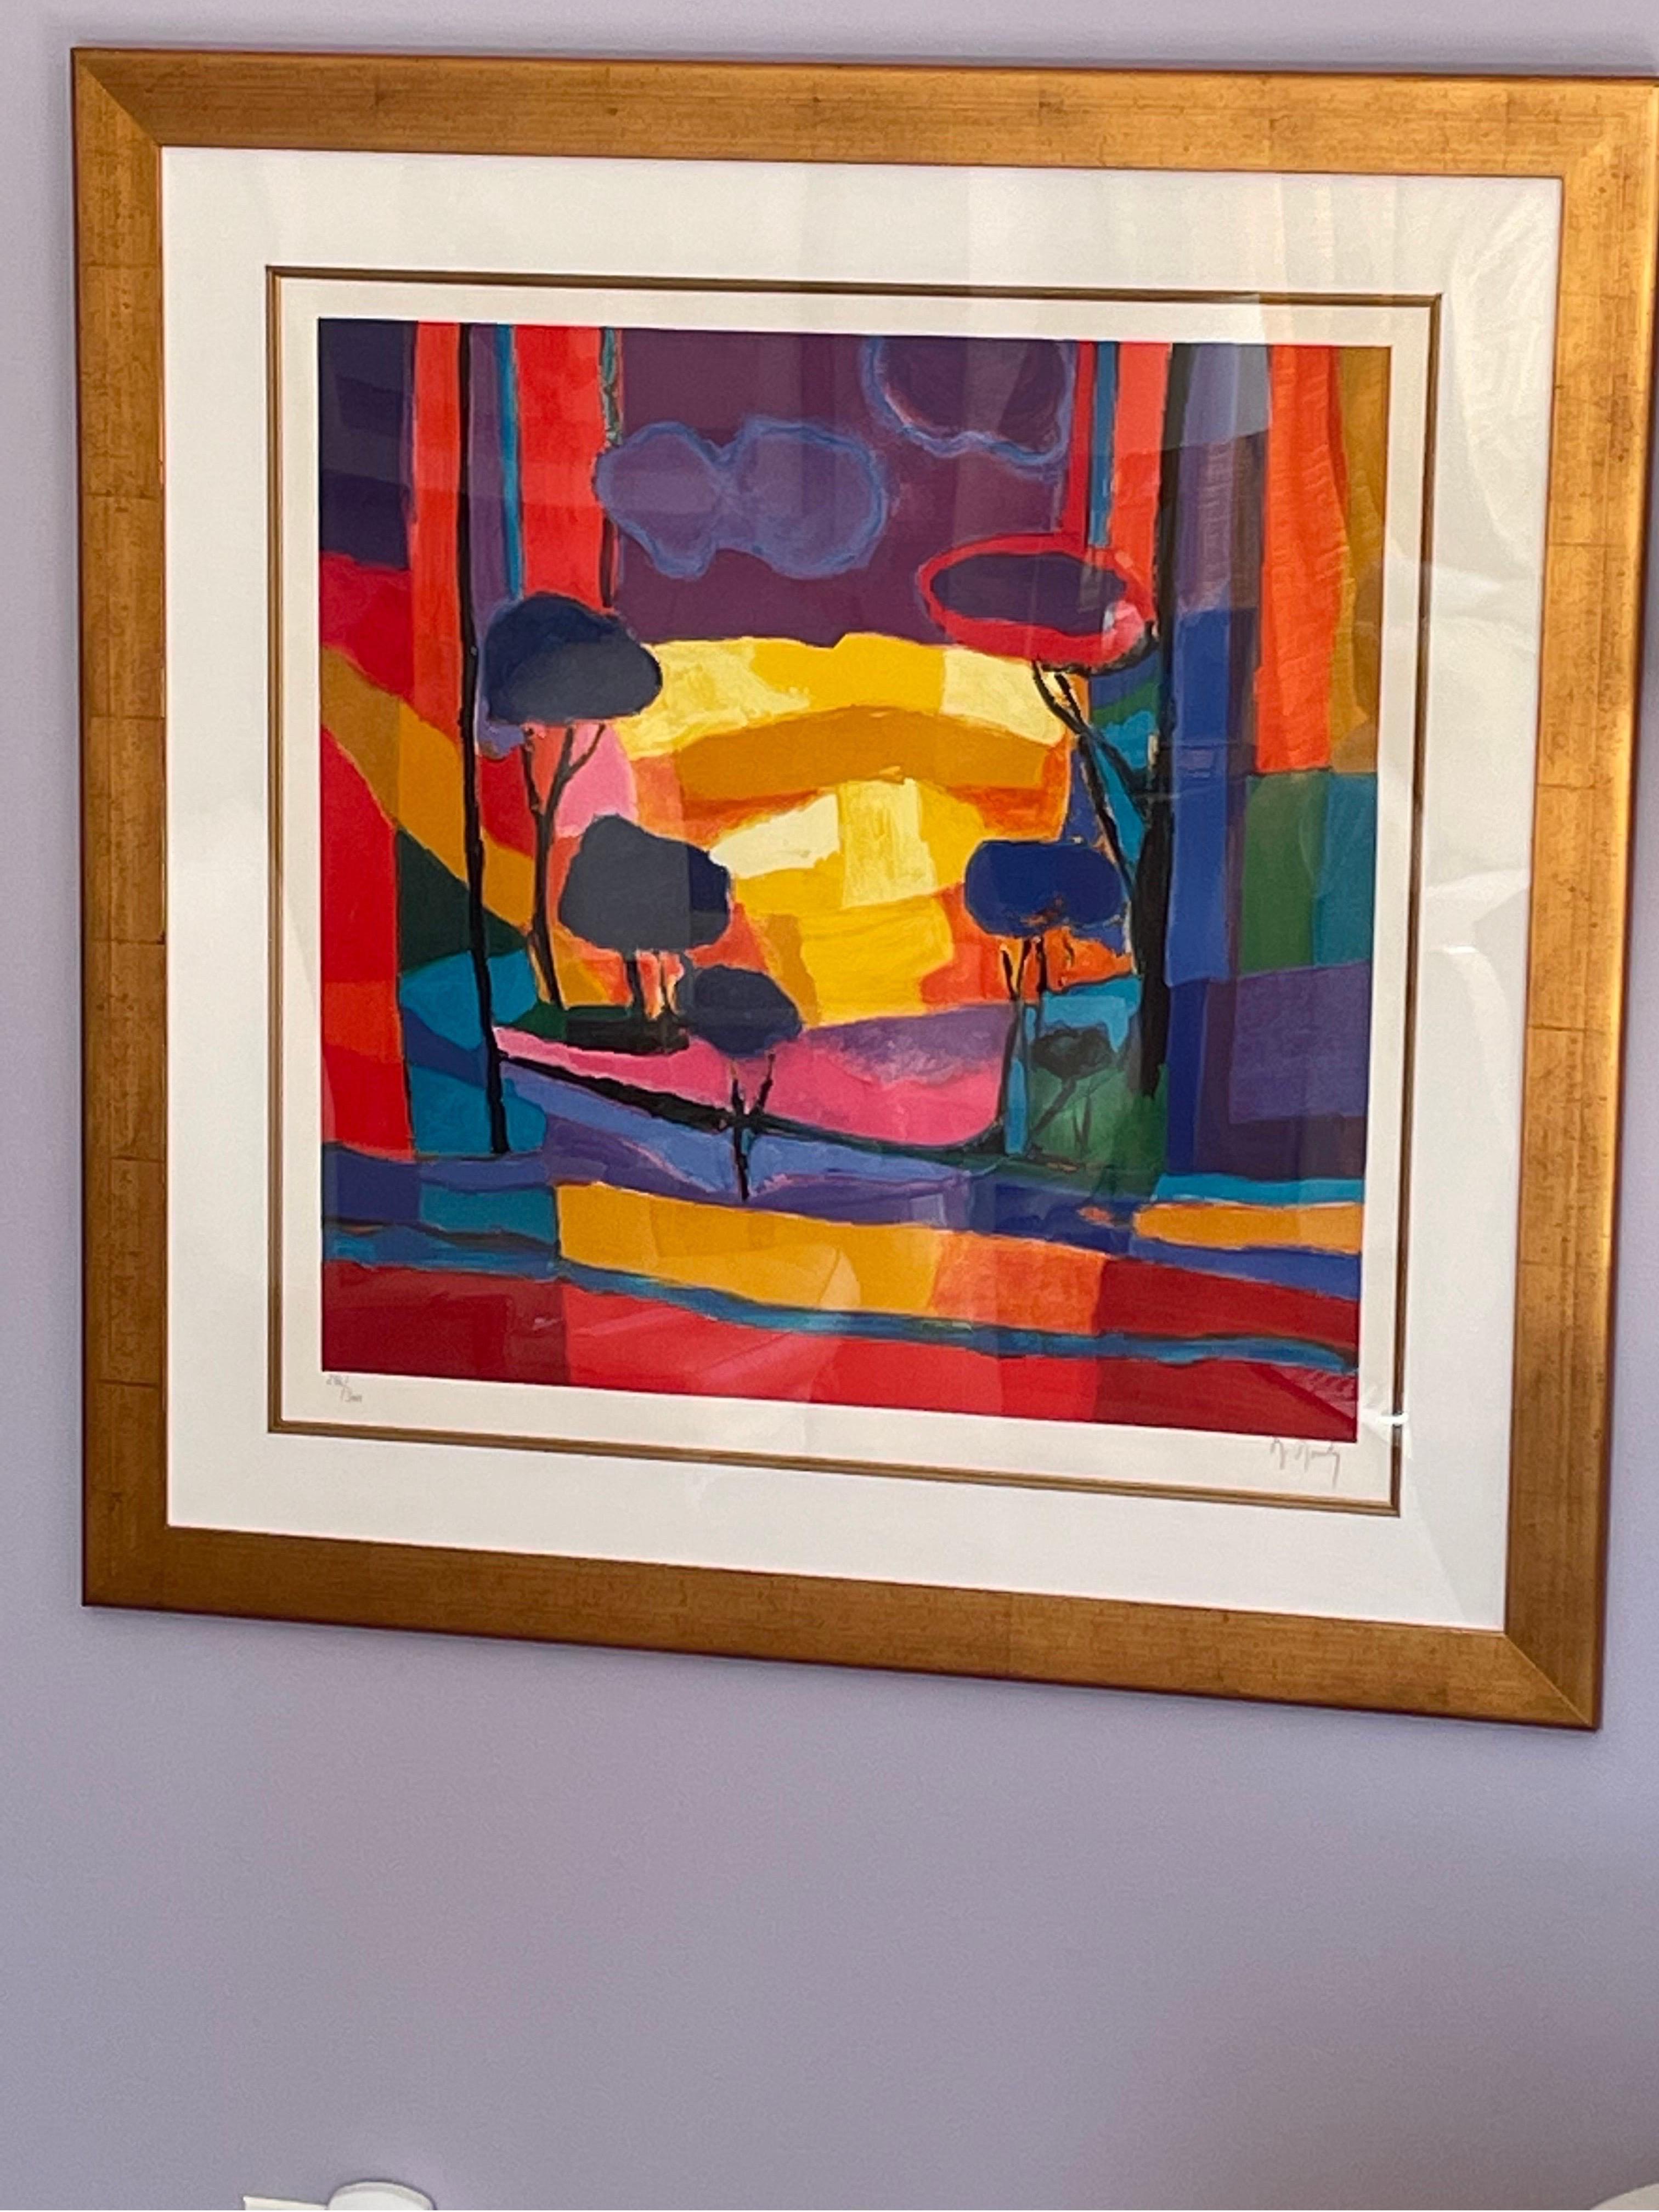 This is a large beautiful vibrant colored lithograph by the French artist Marcel Mouly in 2004 
Signed and numbered and certificate of authenticity on back.